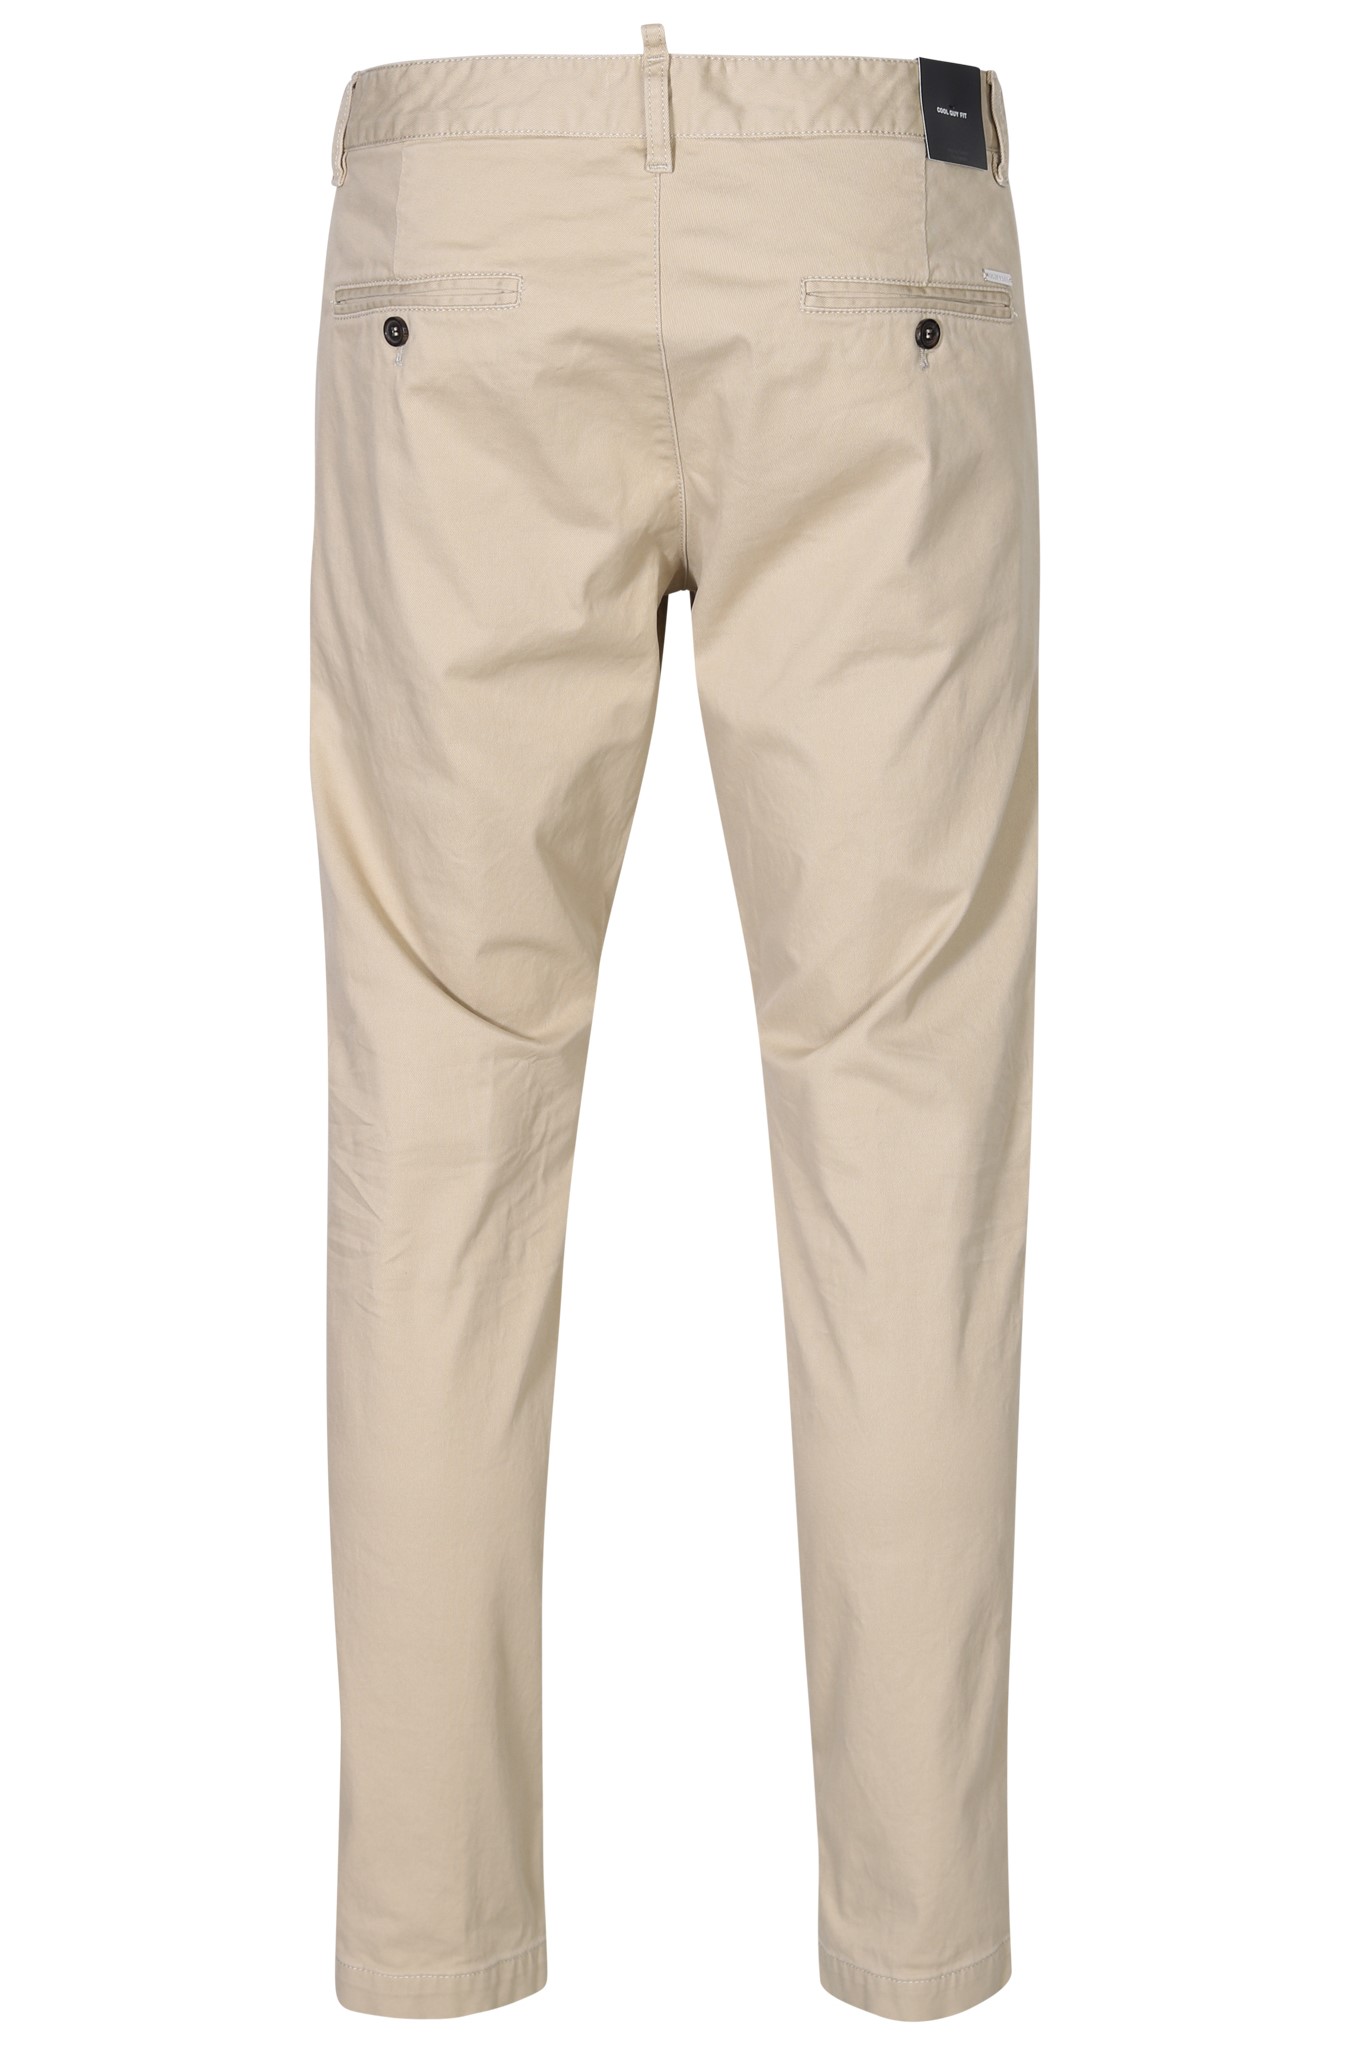 DSQUARED2 Cool Guy Chino Pant in Beige 46